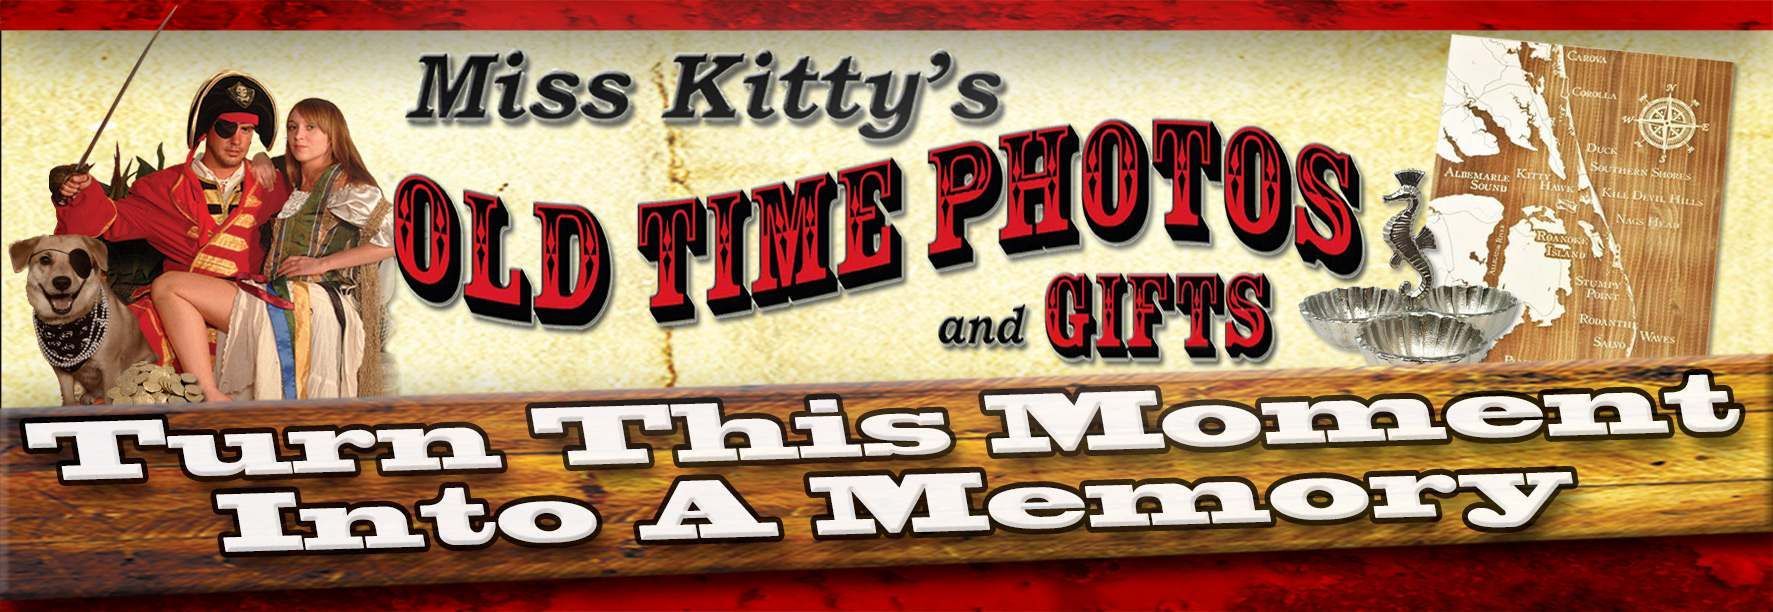 miss kitty 's old time photos and gifts turn this moment into a memory